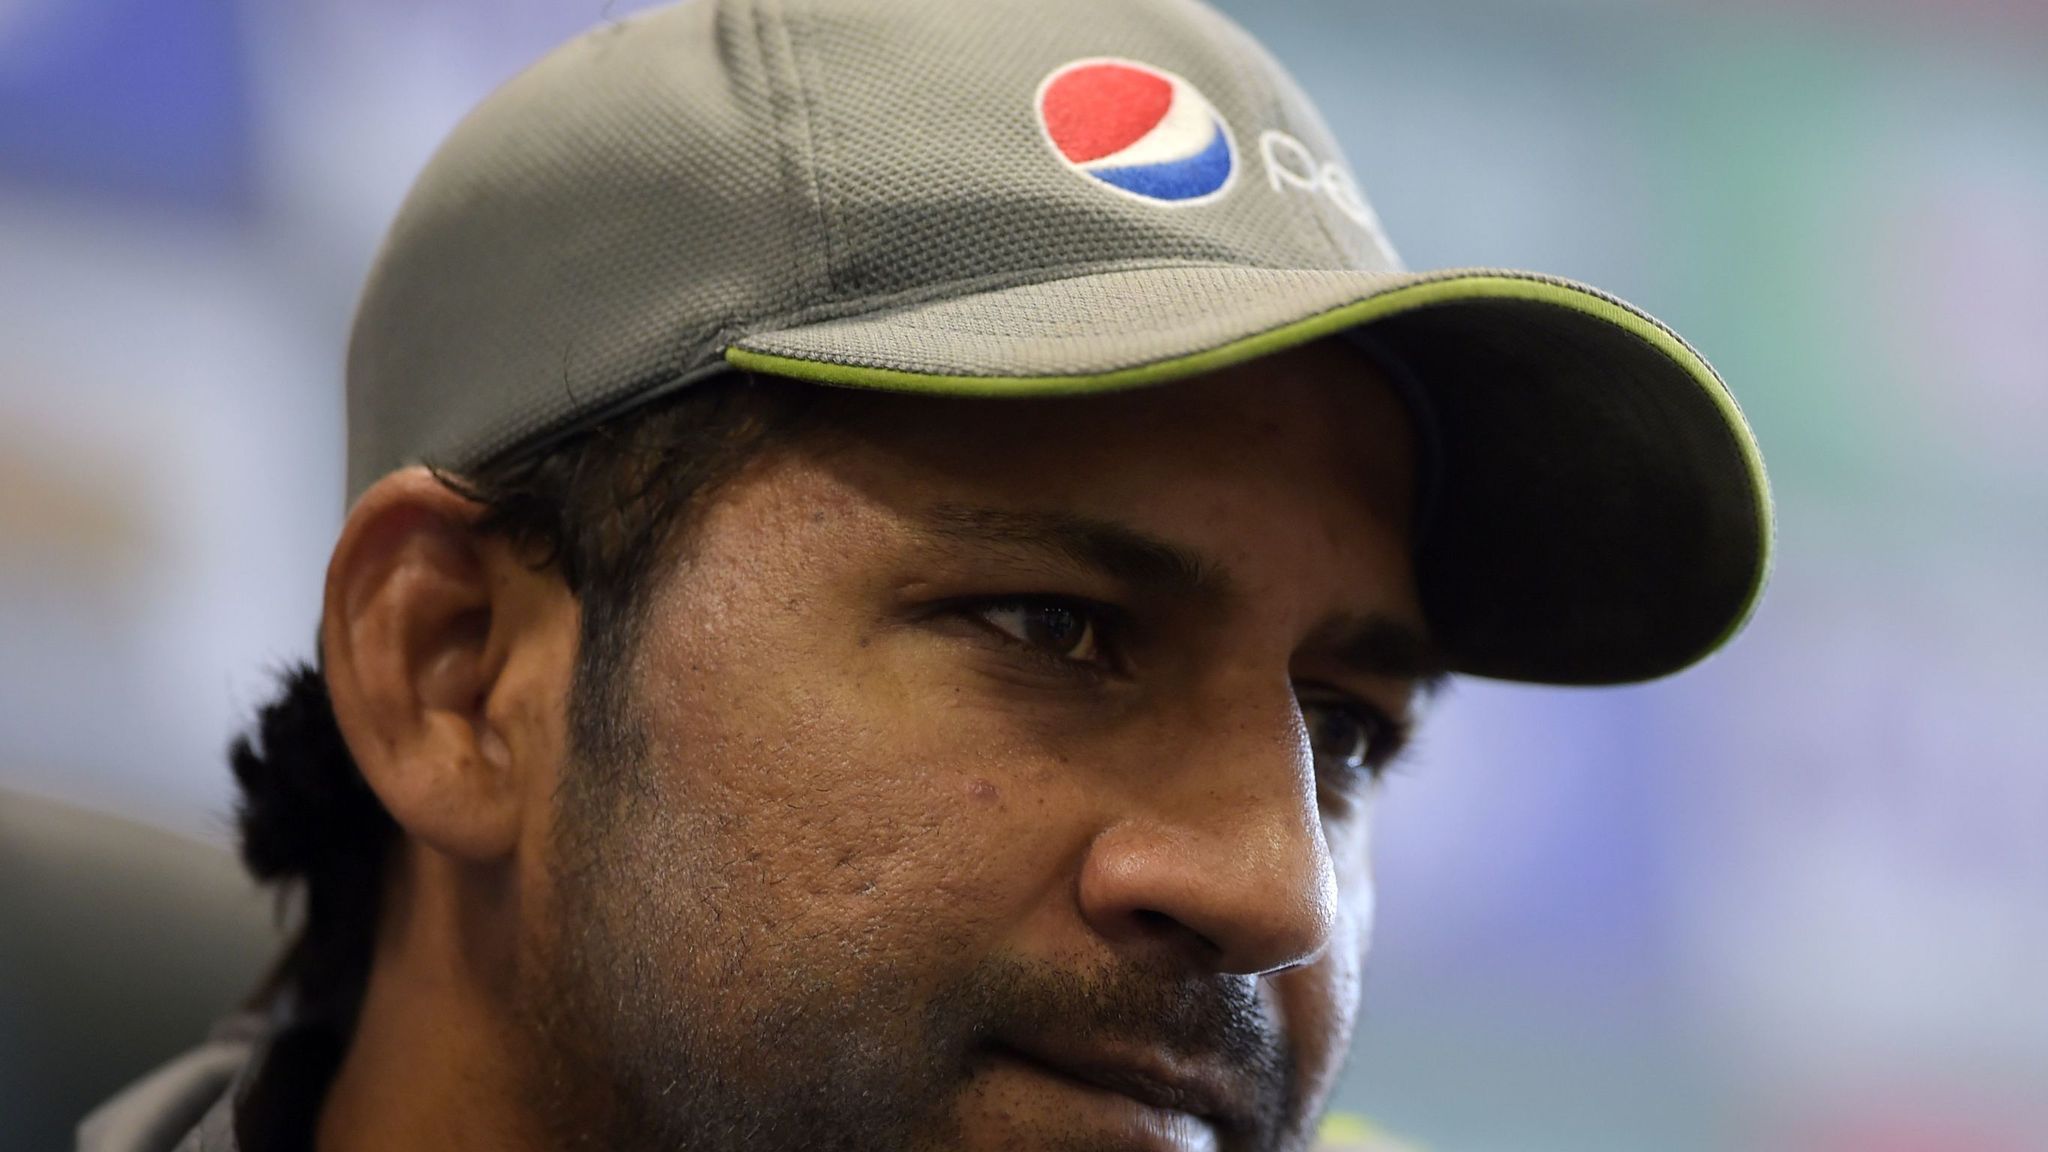 Pakistan captain Sarfraz Ahmed suspended by ICC for racist taunt | Cricket  News | Sky Sports